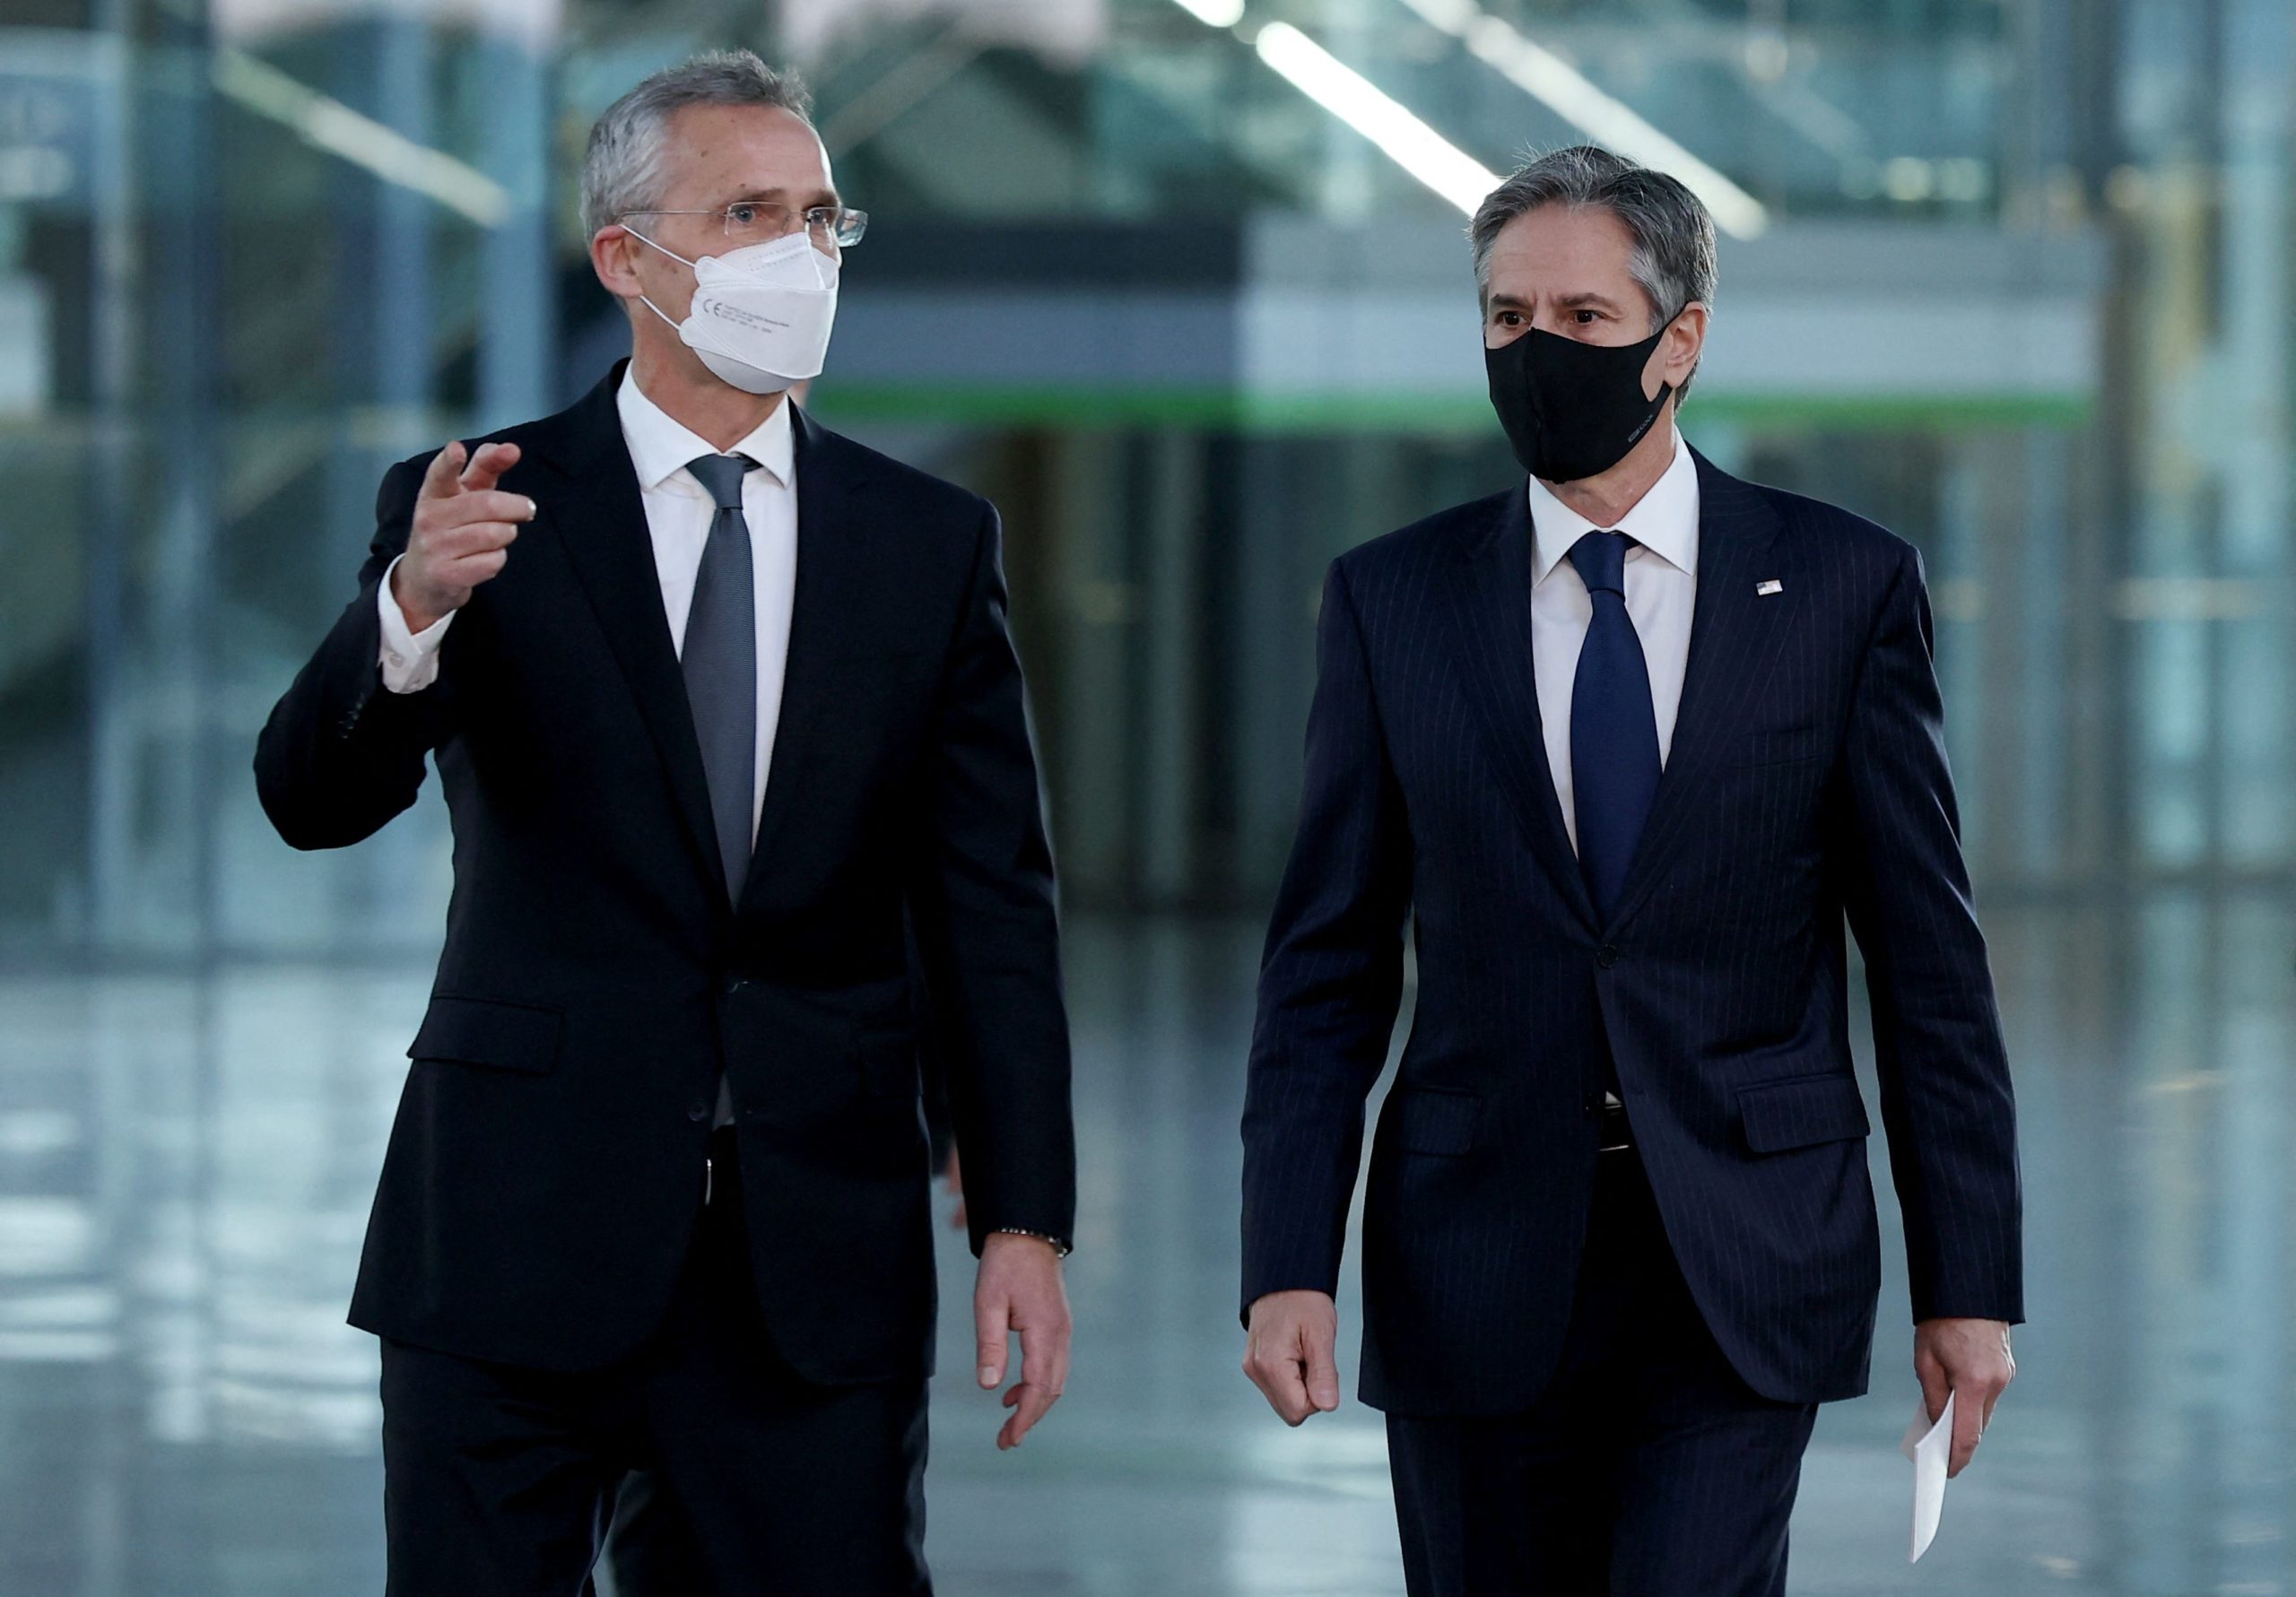 Secretary of State Antony Blinken and NATO's chief Jens Stoltenberg arrive for a press conference on Wednesday in Brussels, Belgium. (Kenzo Tribouillard/Pool/AFP via Getty Images)